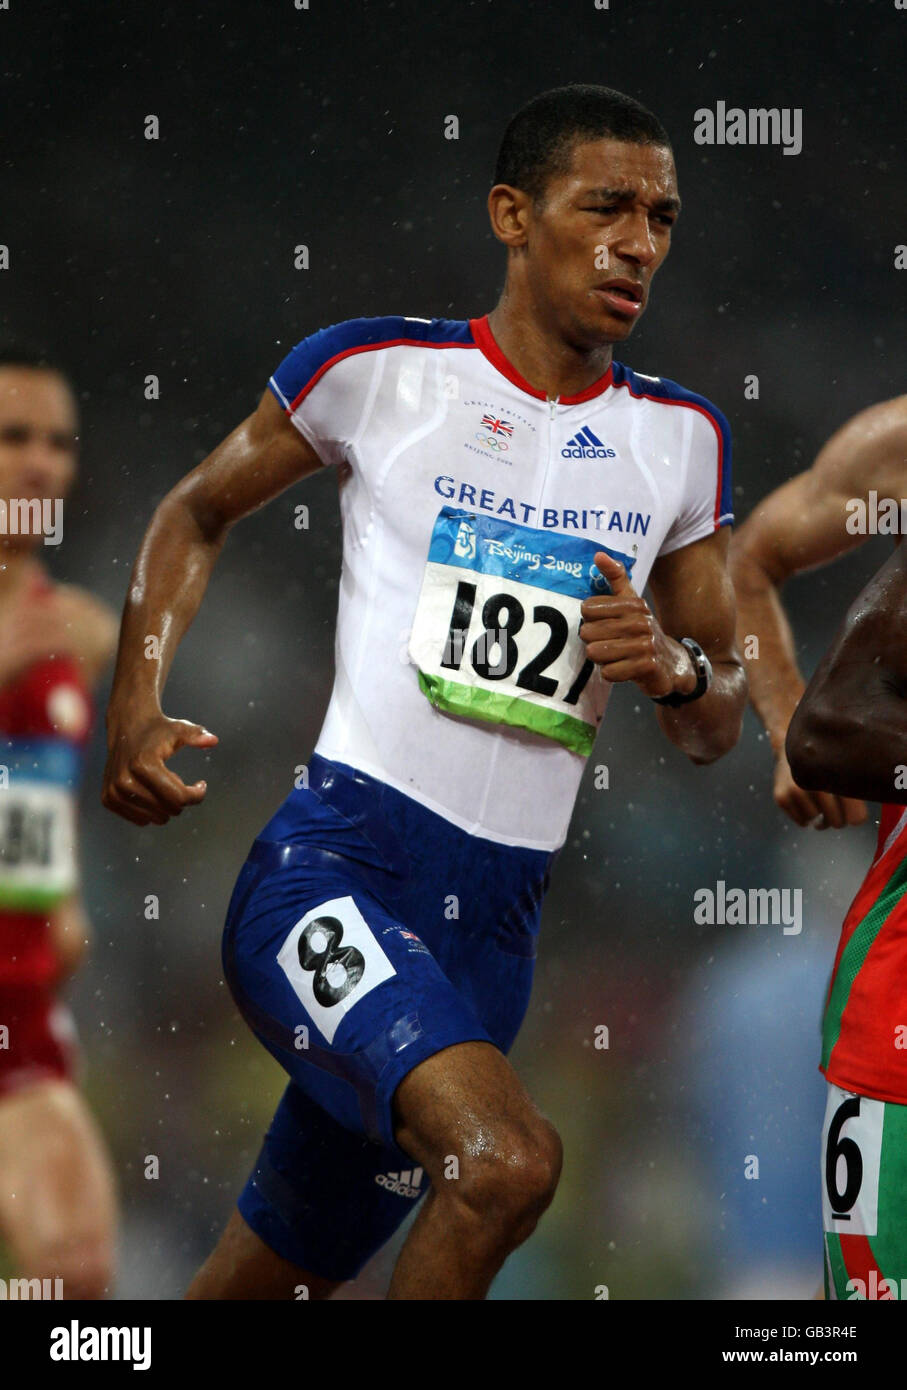 Great Britain's Michael Rimmer during the men's 800m semi final at the National Stadium in Beijing during the 2008 Beijing Olympic Games in China. Stock Photo